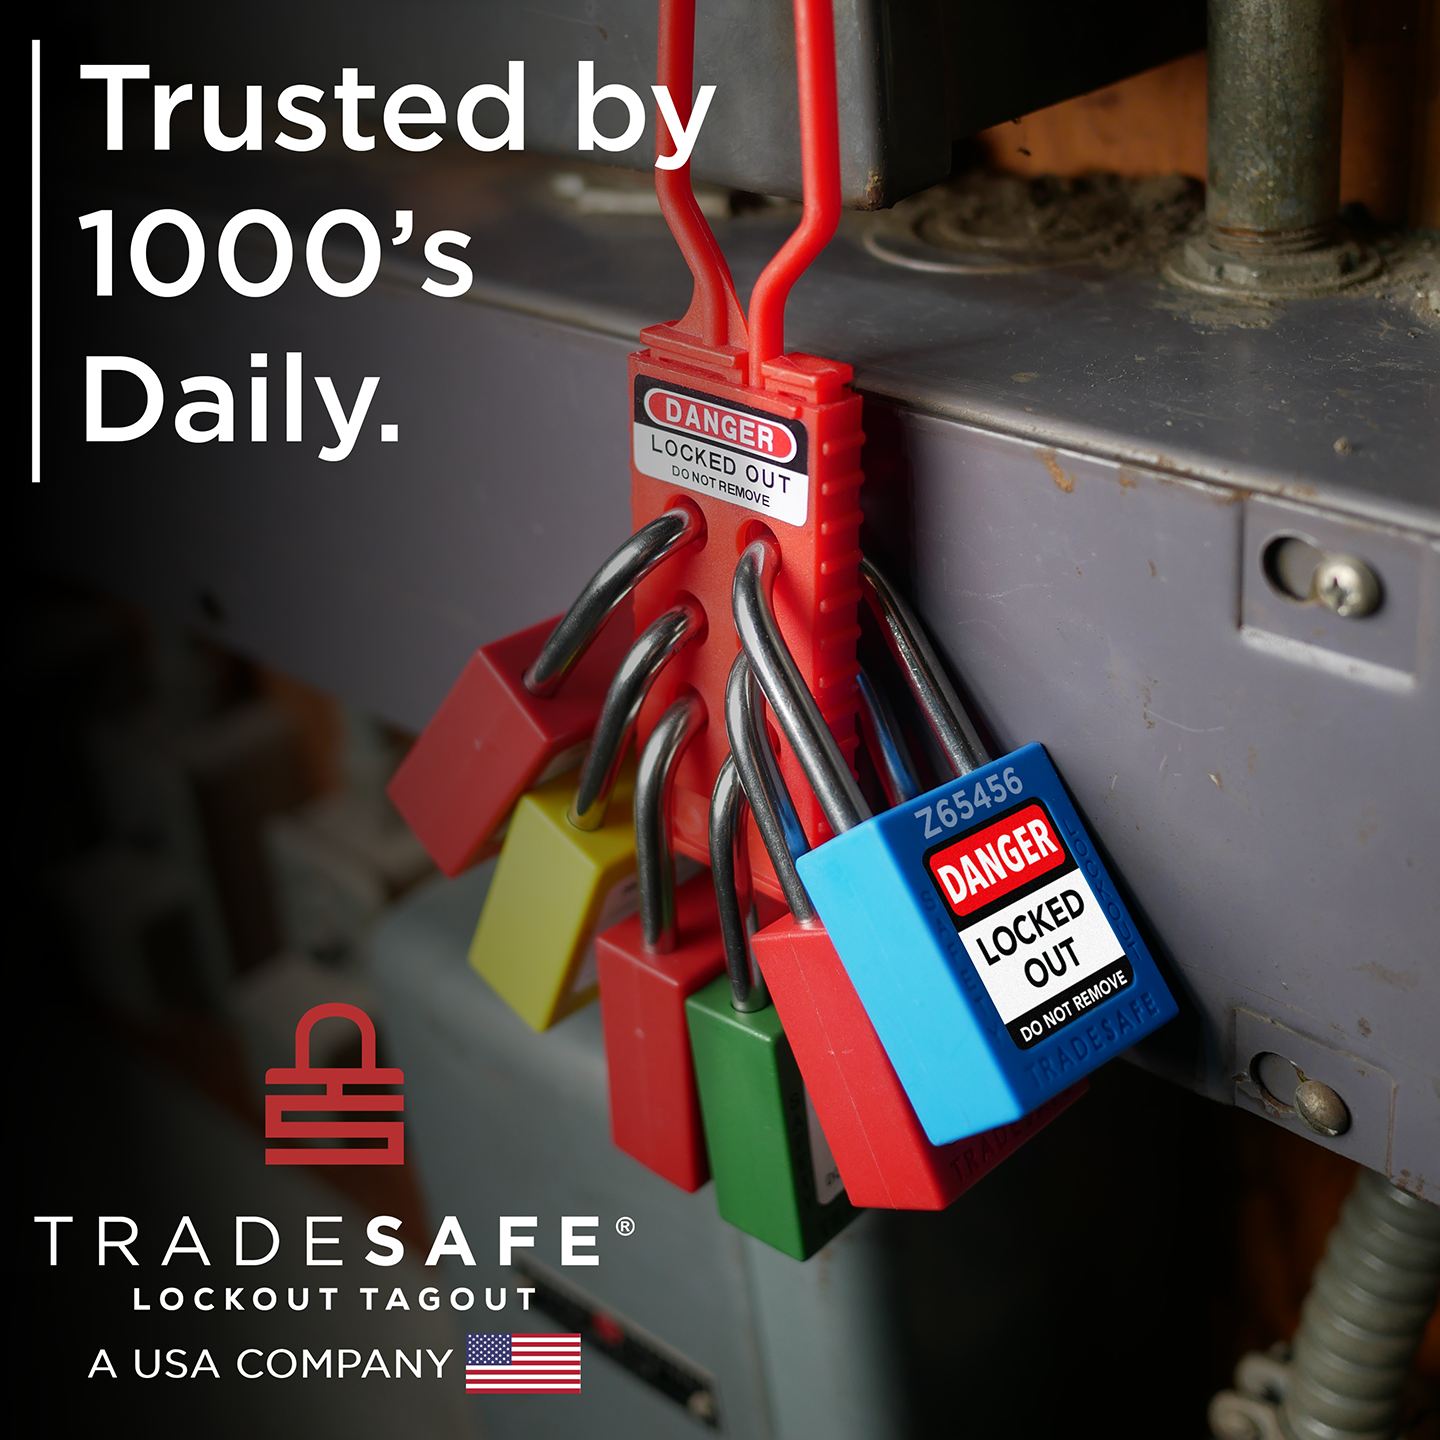 tradesafe: trusted by 1000's daily, loto locks in-use on nylon hasp